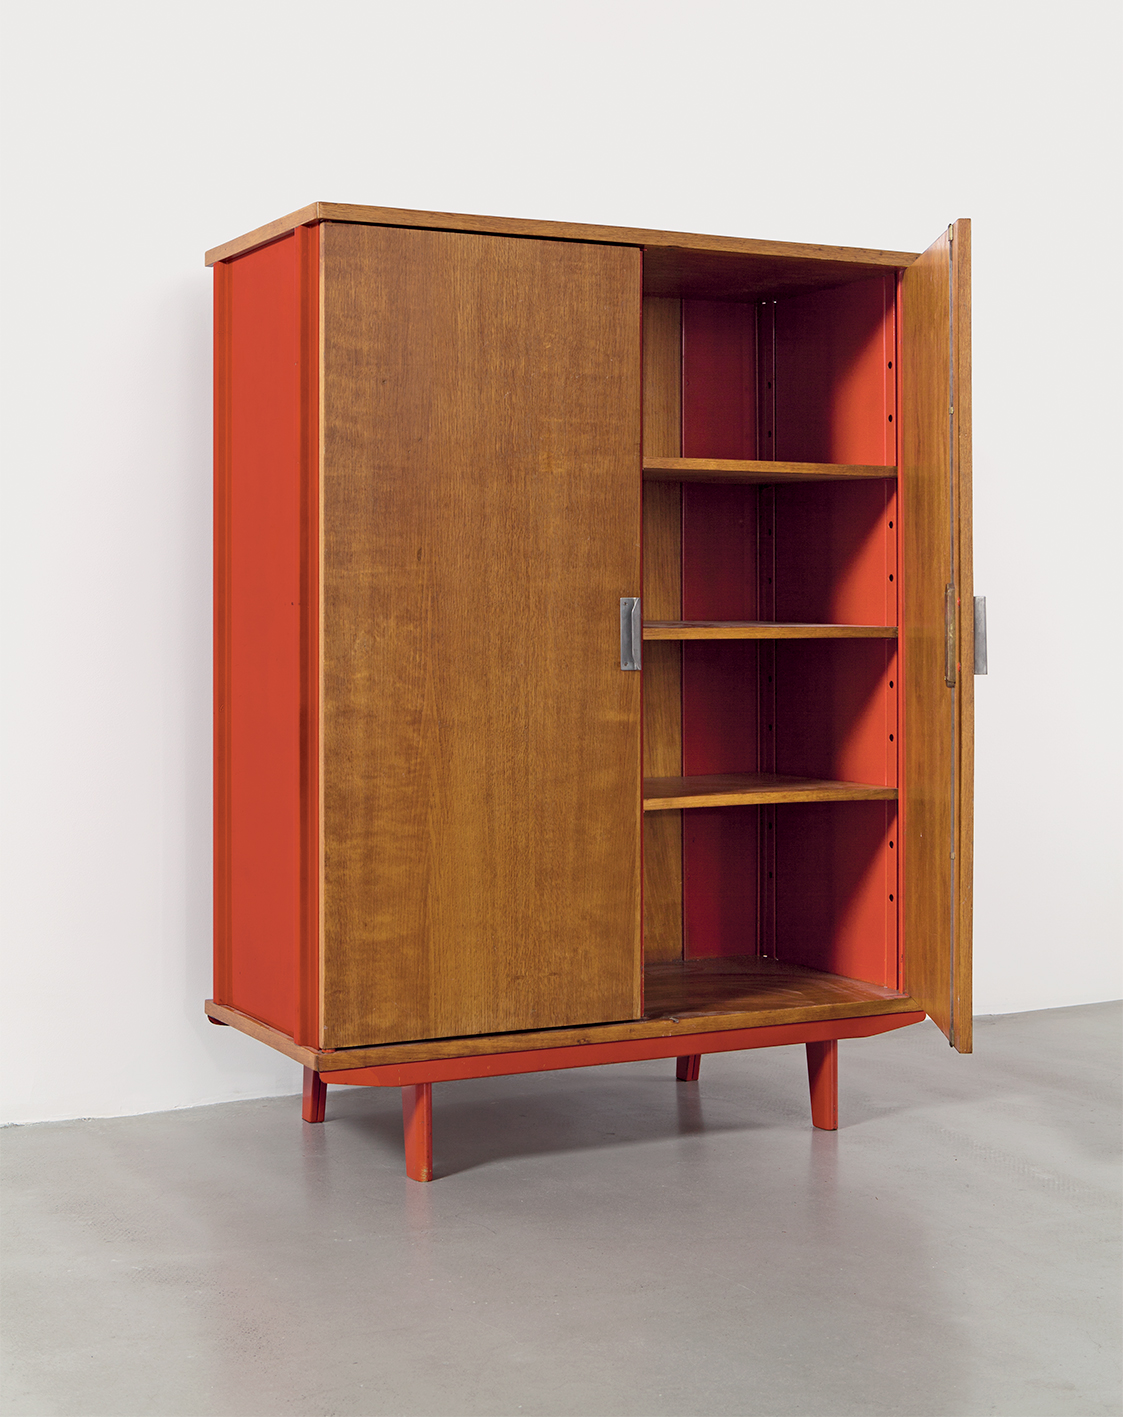 Wardrobe no. 100, variant with outwardopening doors, 1952. Provenance: Cité Universitaire, Nancy (2nd series of furnishings).